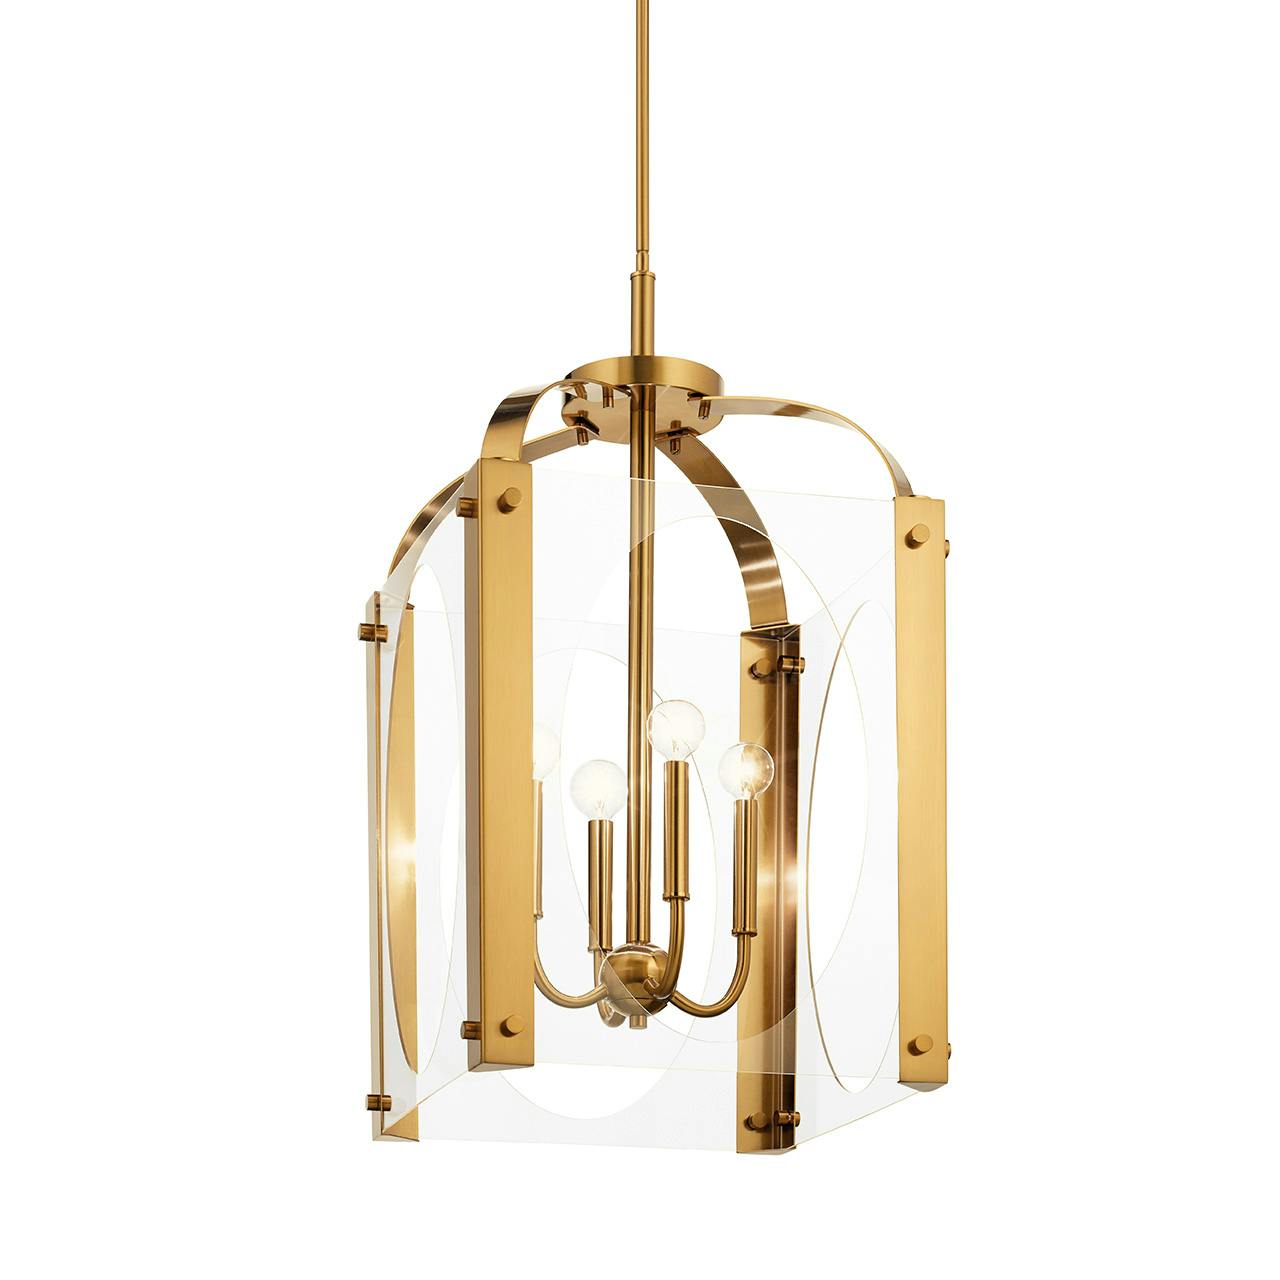 Pytel™ 4 Light Foyer Pendant Fox Gold without the canopy on a white background